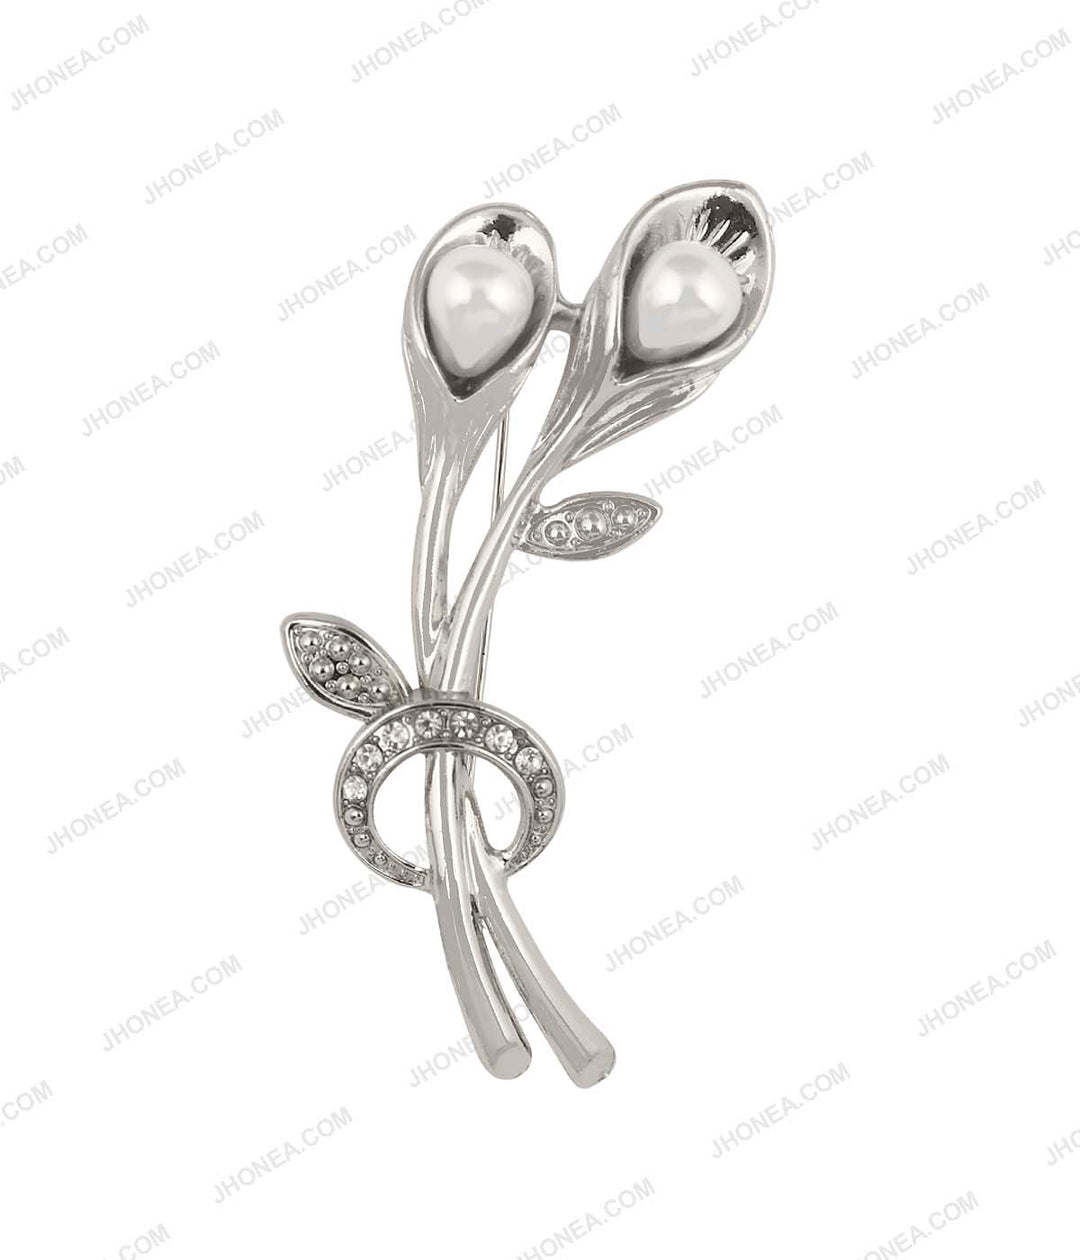 Sparkling Diamond & Faux Pearl Flower Bouquet Brooch in Shiny Silver Color